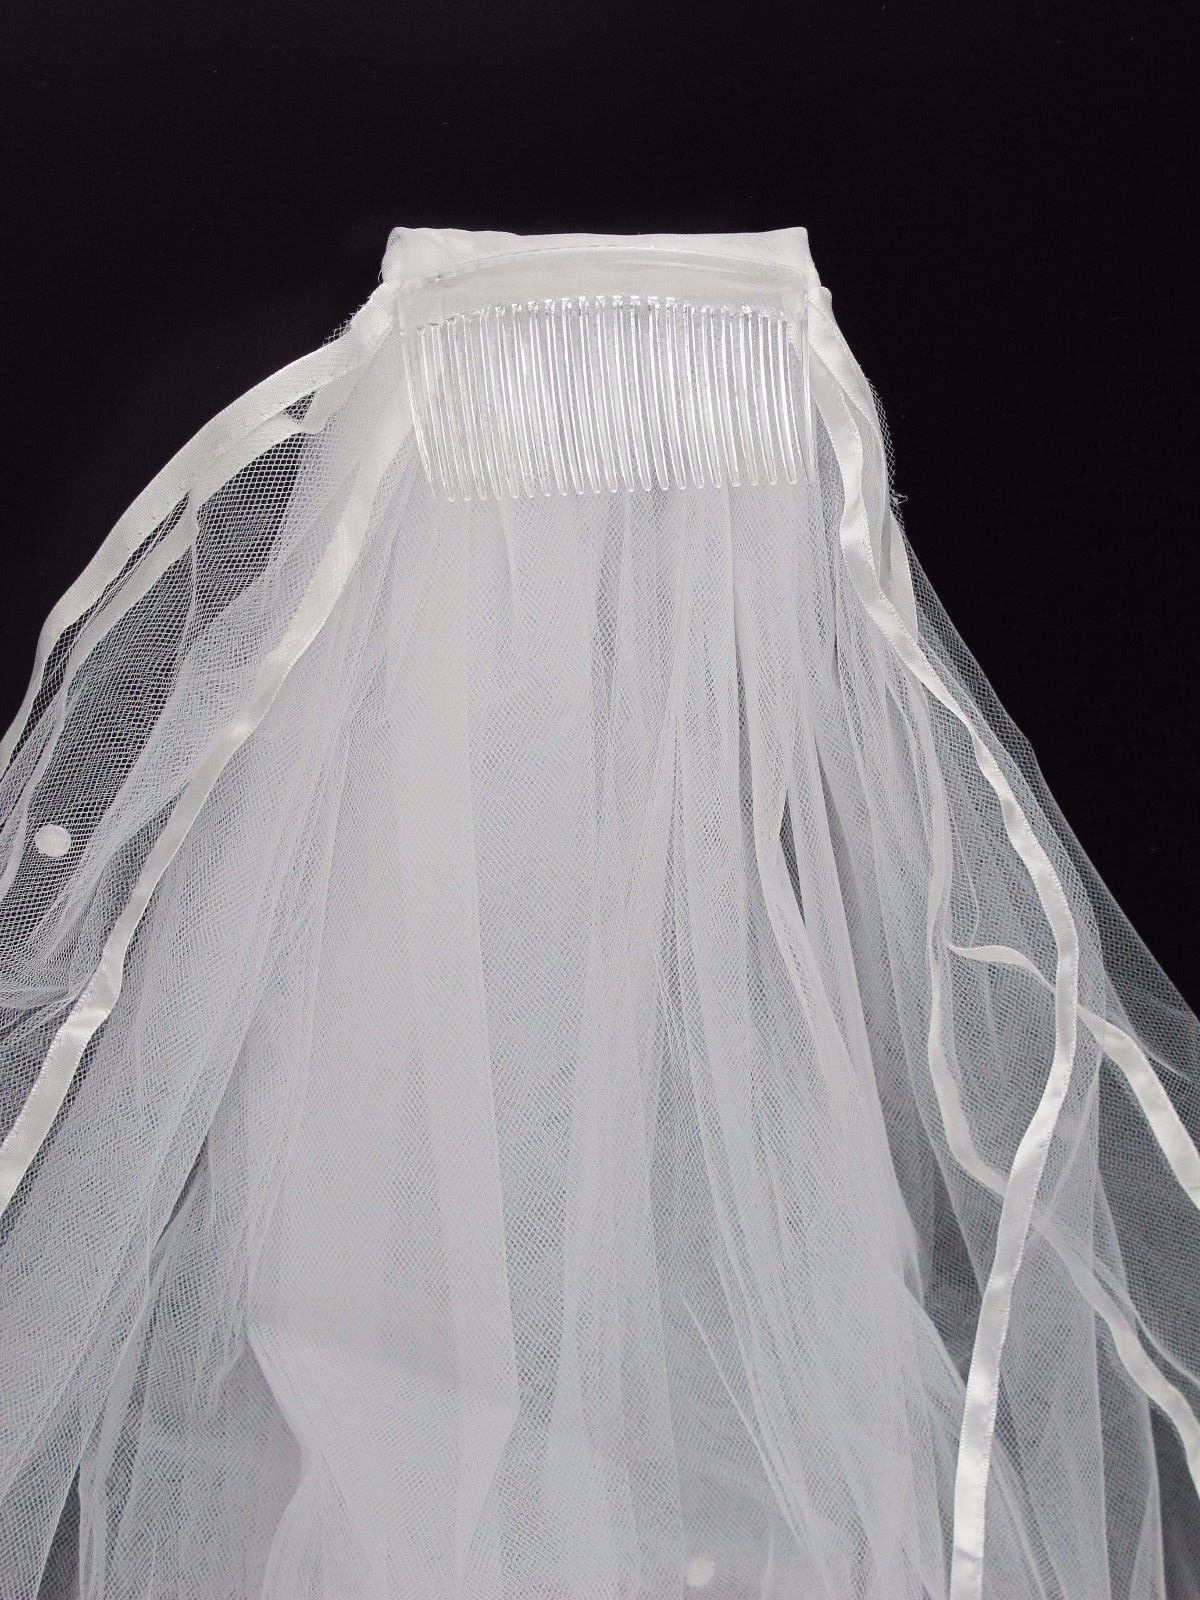 Ivory Wedding Veils With Pearls
 3T White Ivory Pearl Wedding Bridal Veil With b